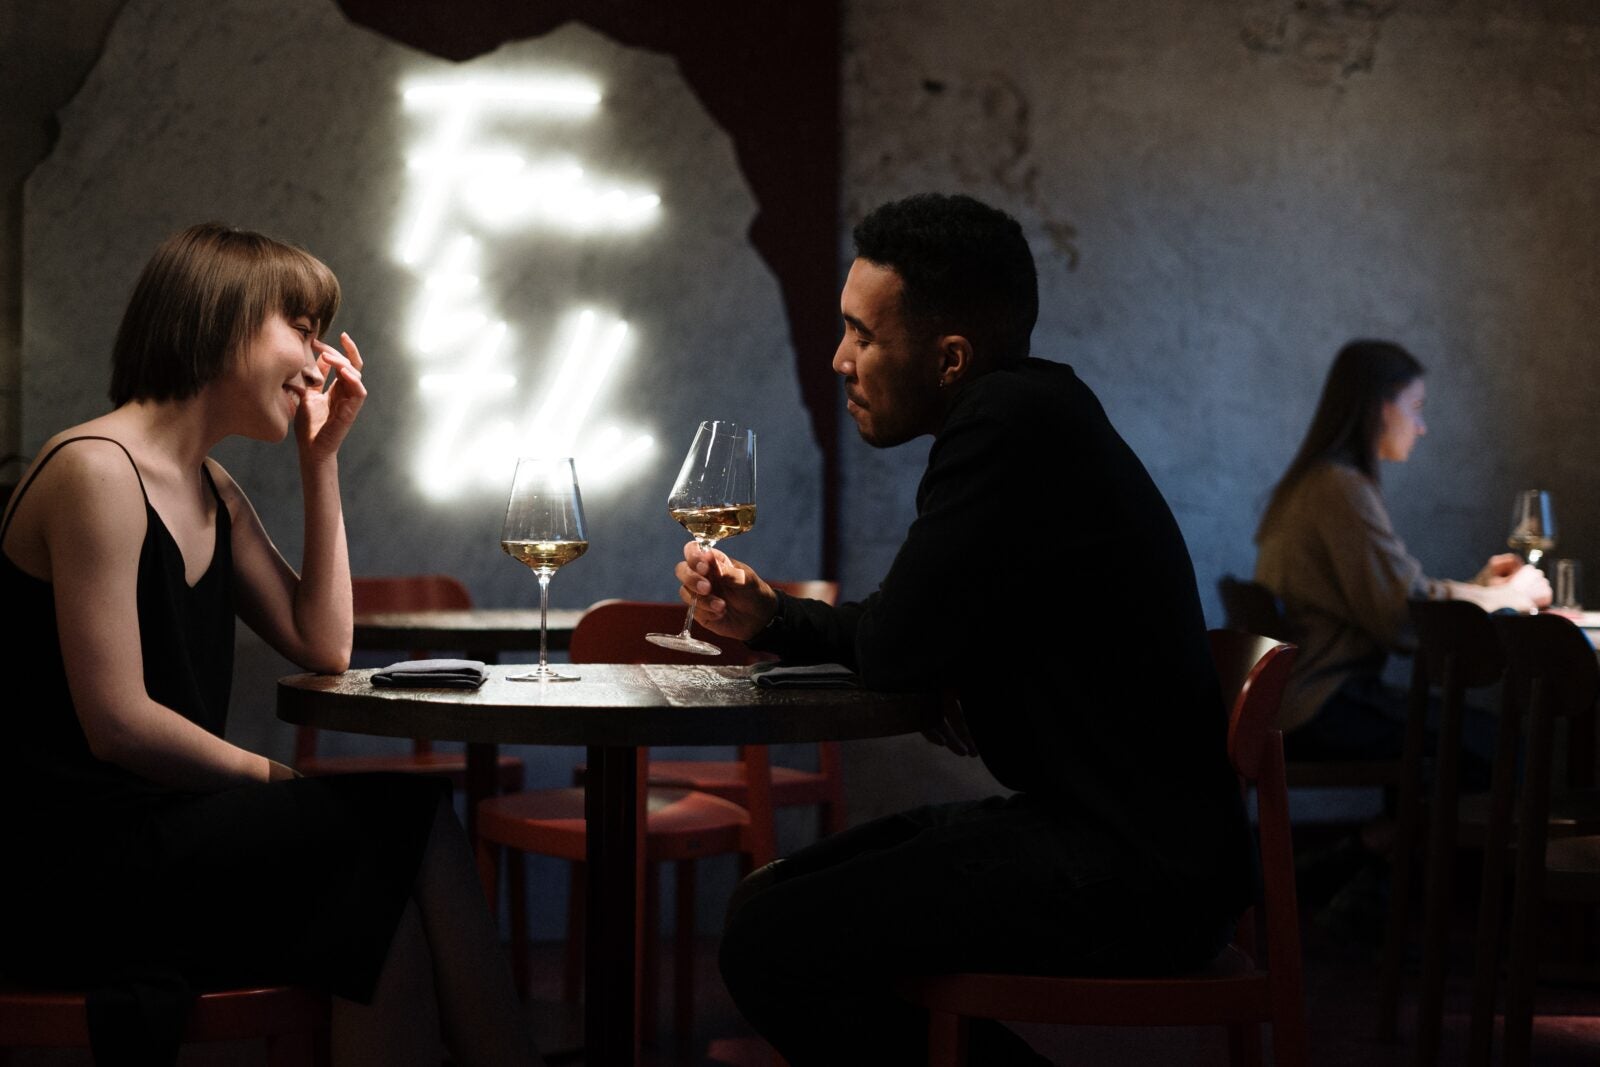 A couple on a date in a dark cafe with light decorations on the wall.